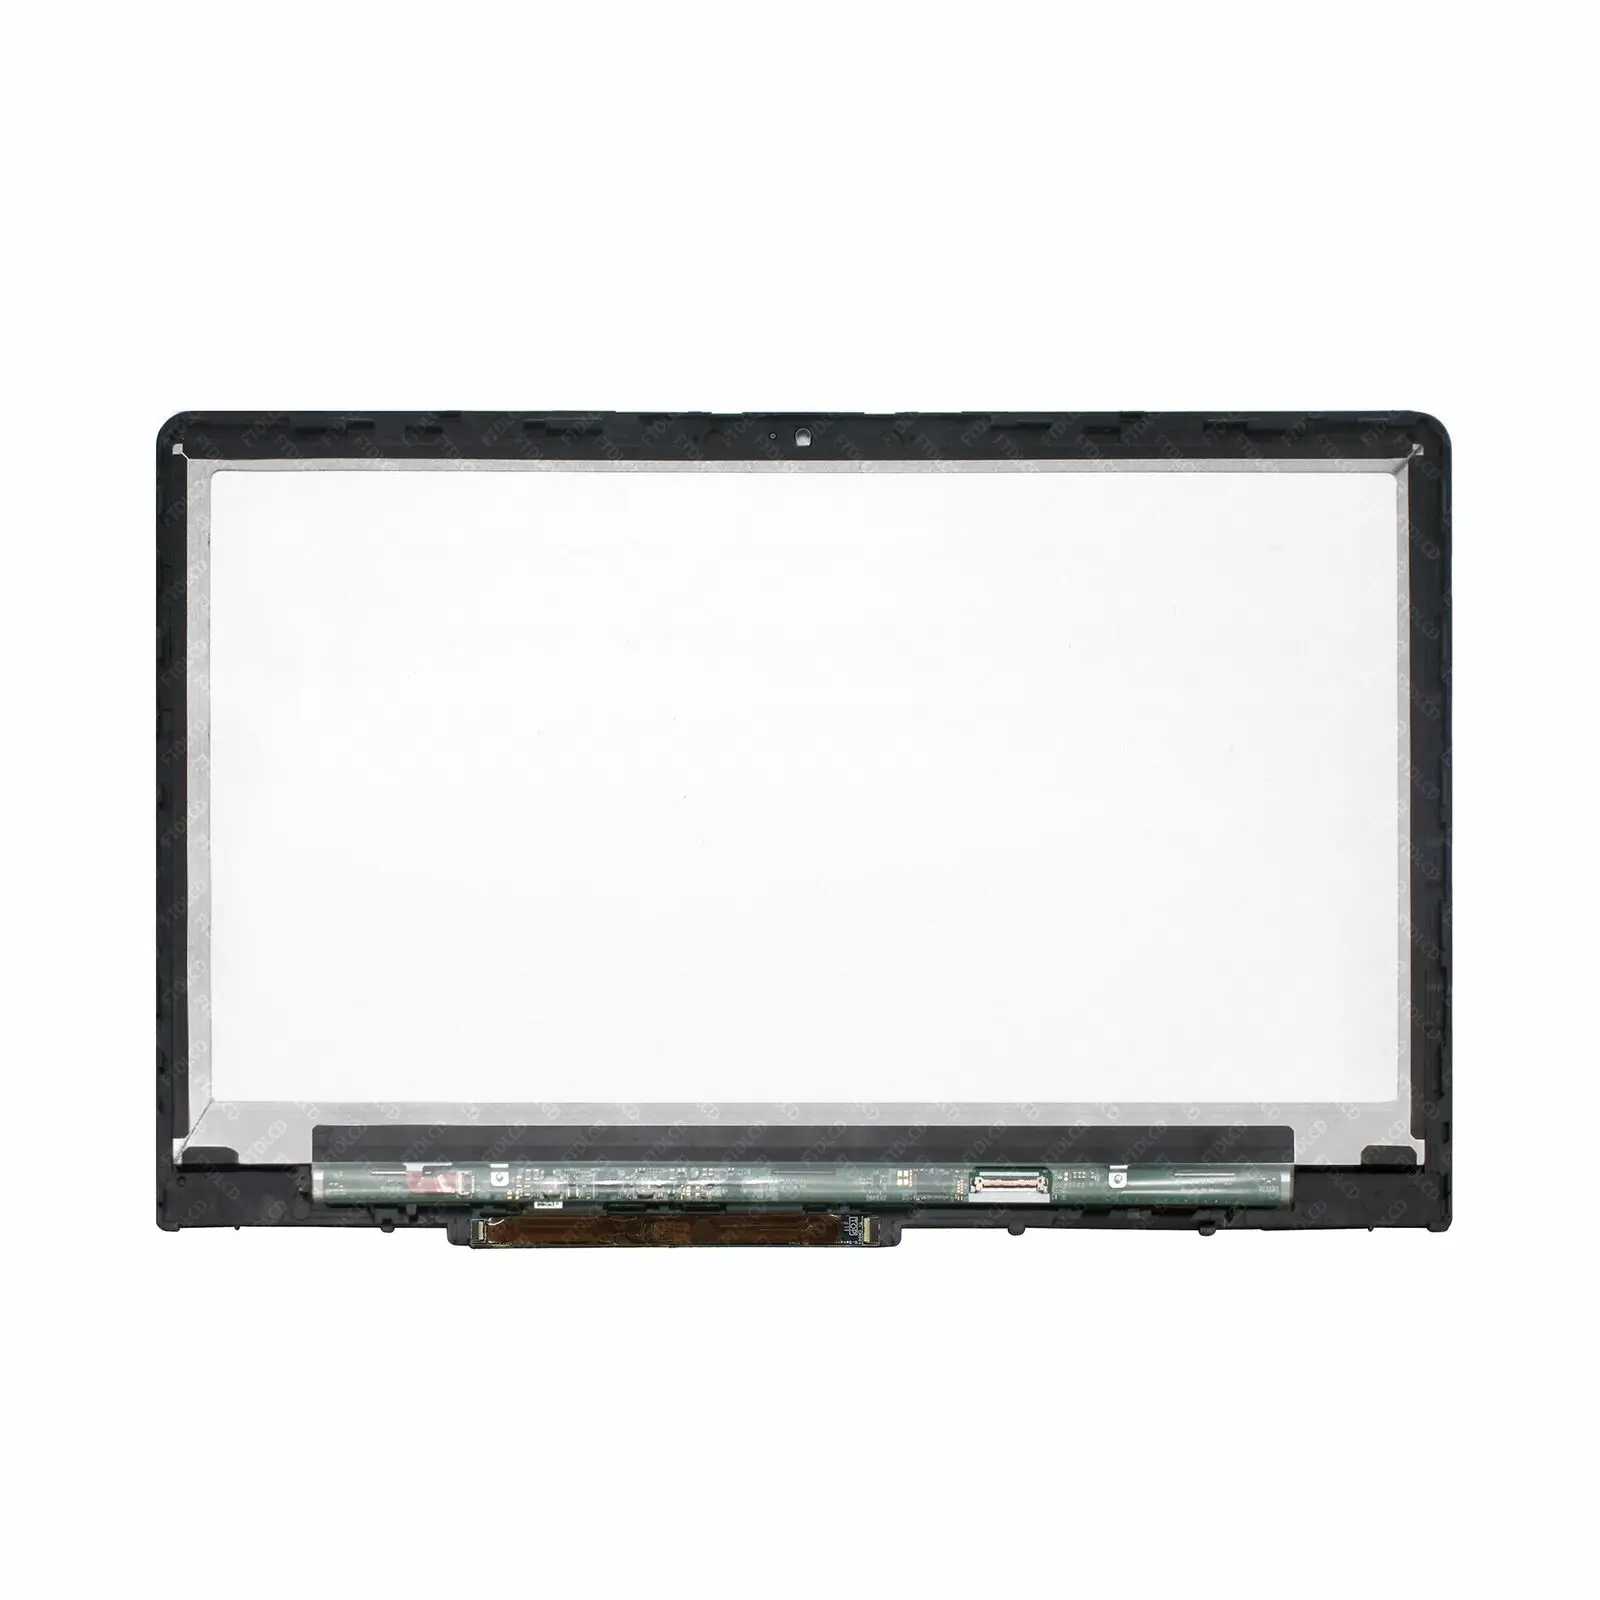 jianglun 15 6 fhd led lcd touchscreen digitizer display for hp pavilion x360 15 br052od free global shipping